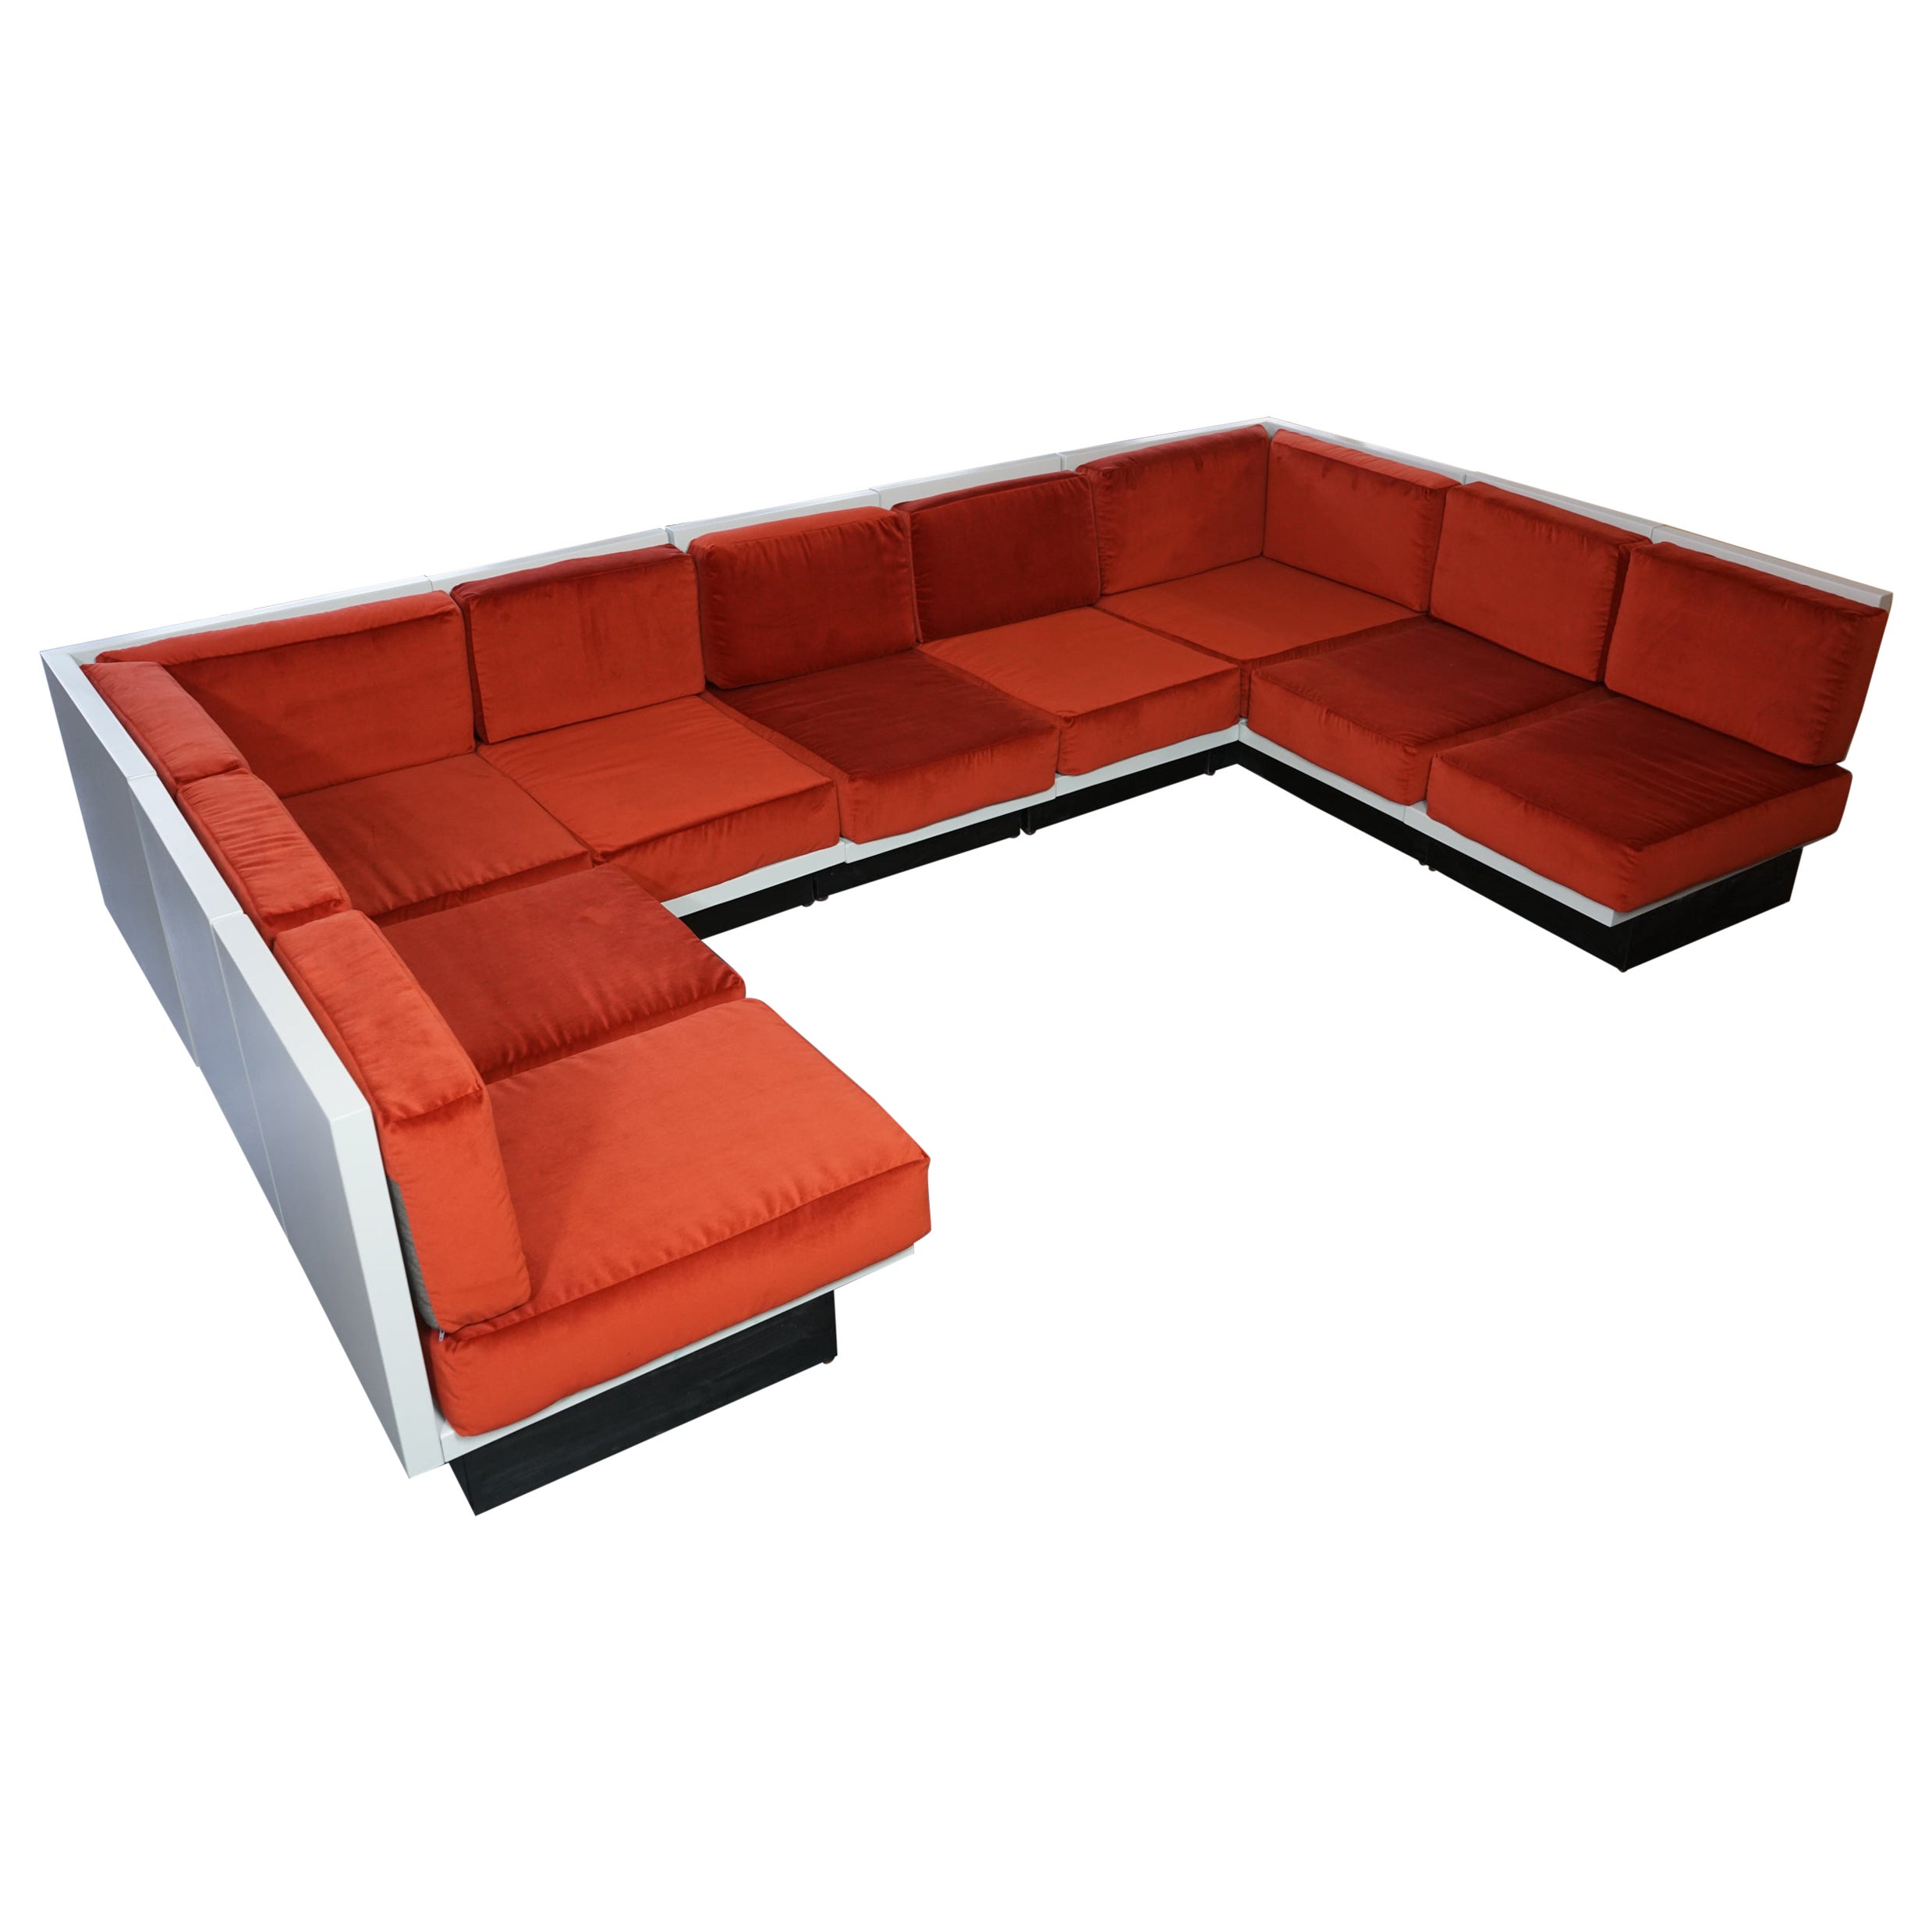 Modular Couch by Ahti Taskinen for Asko, 1970s For Sale